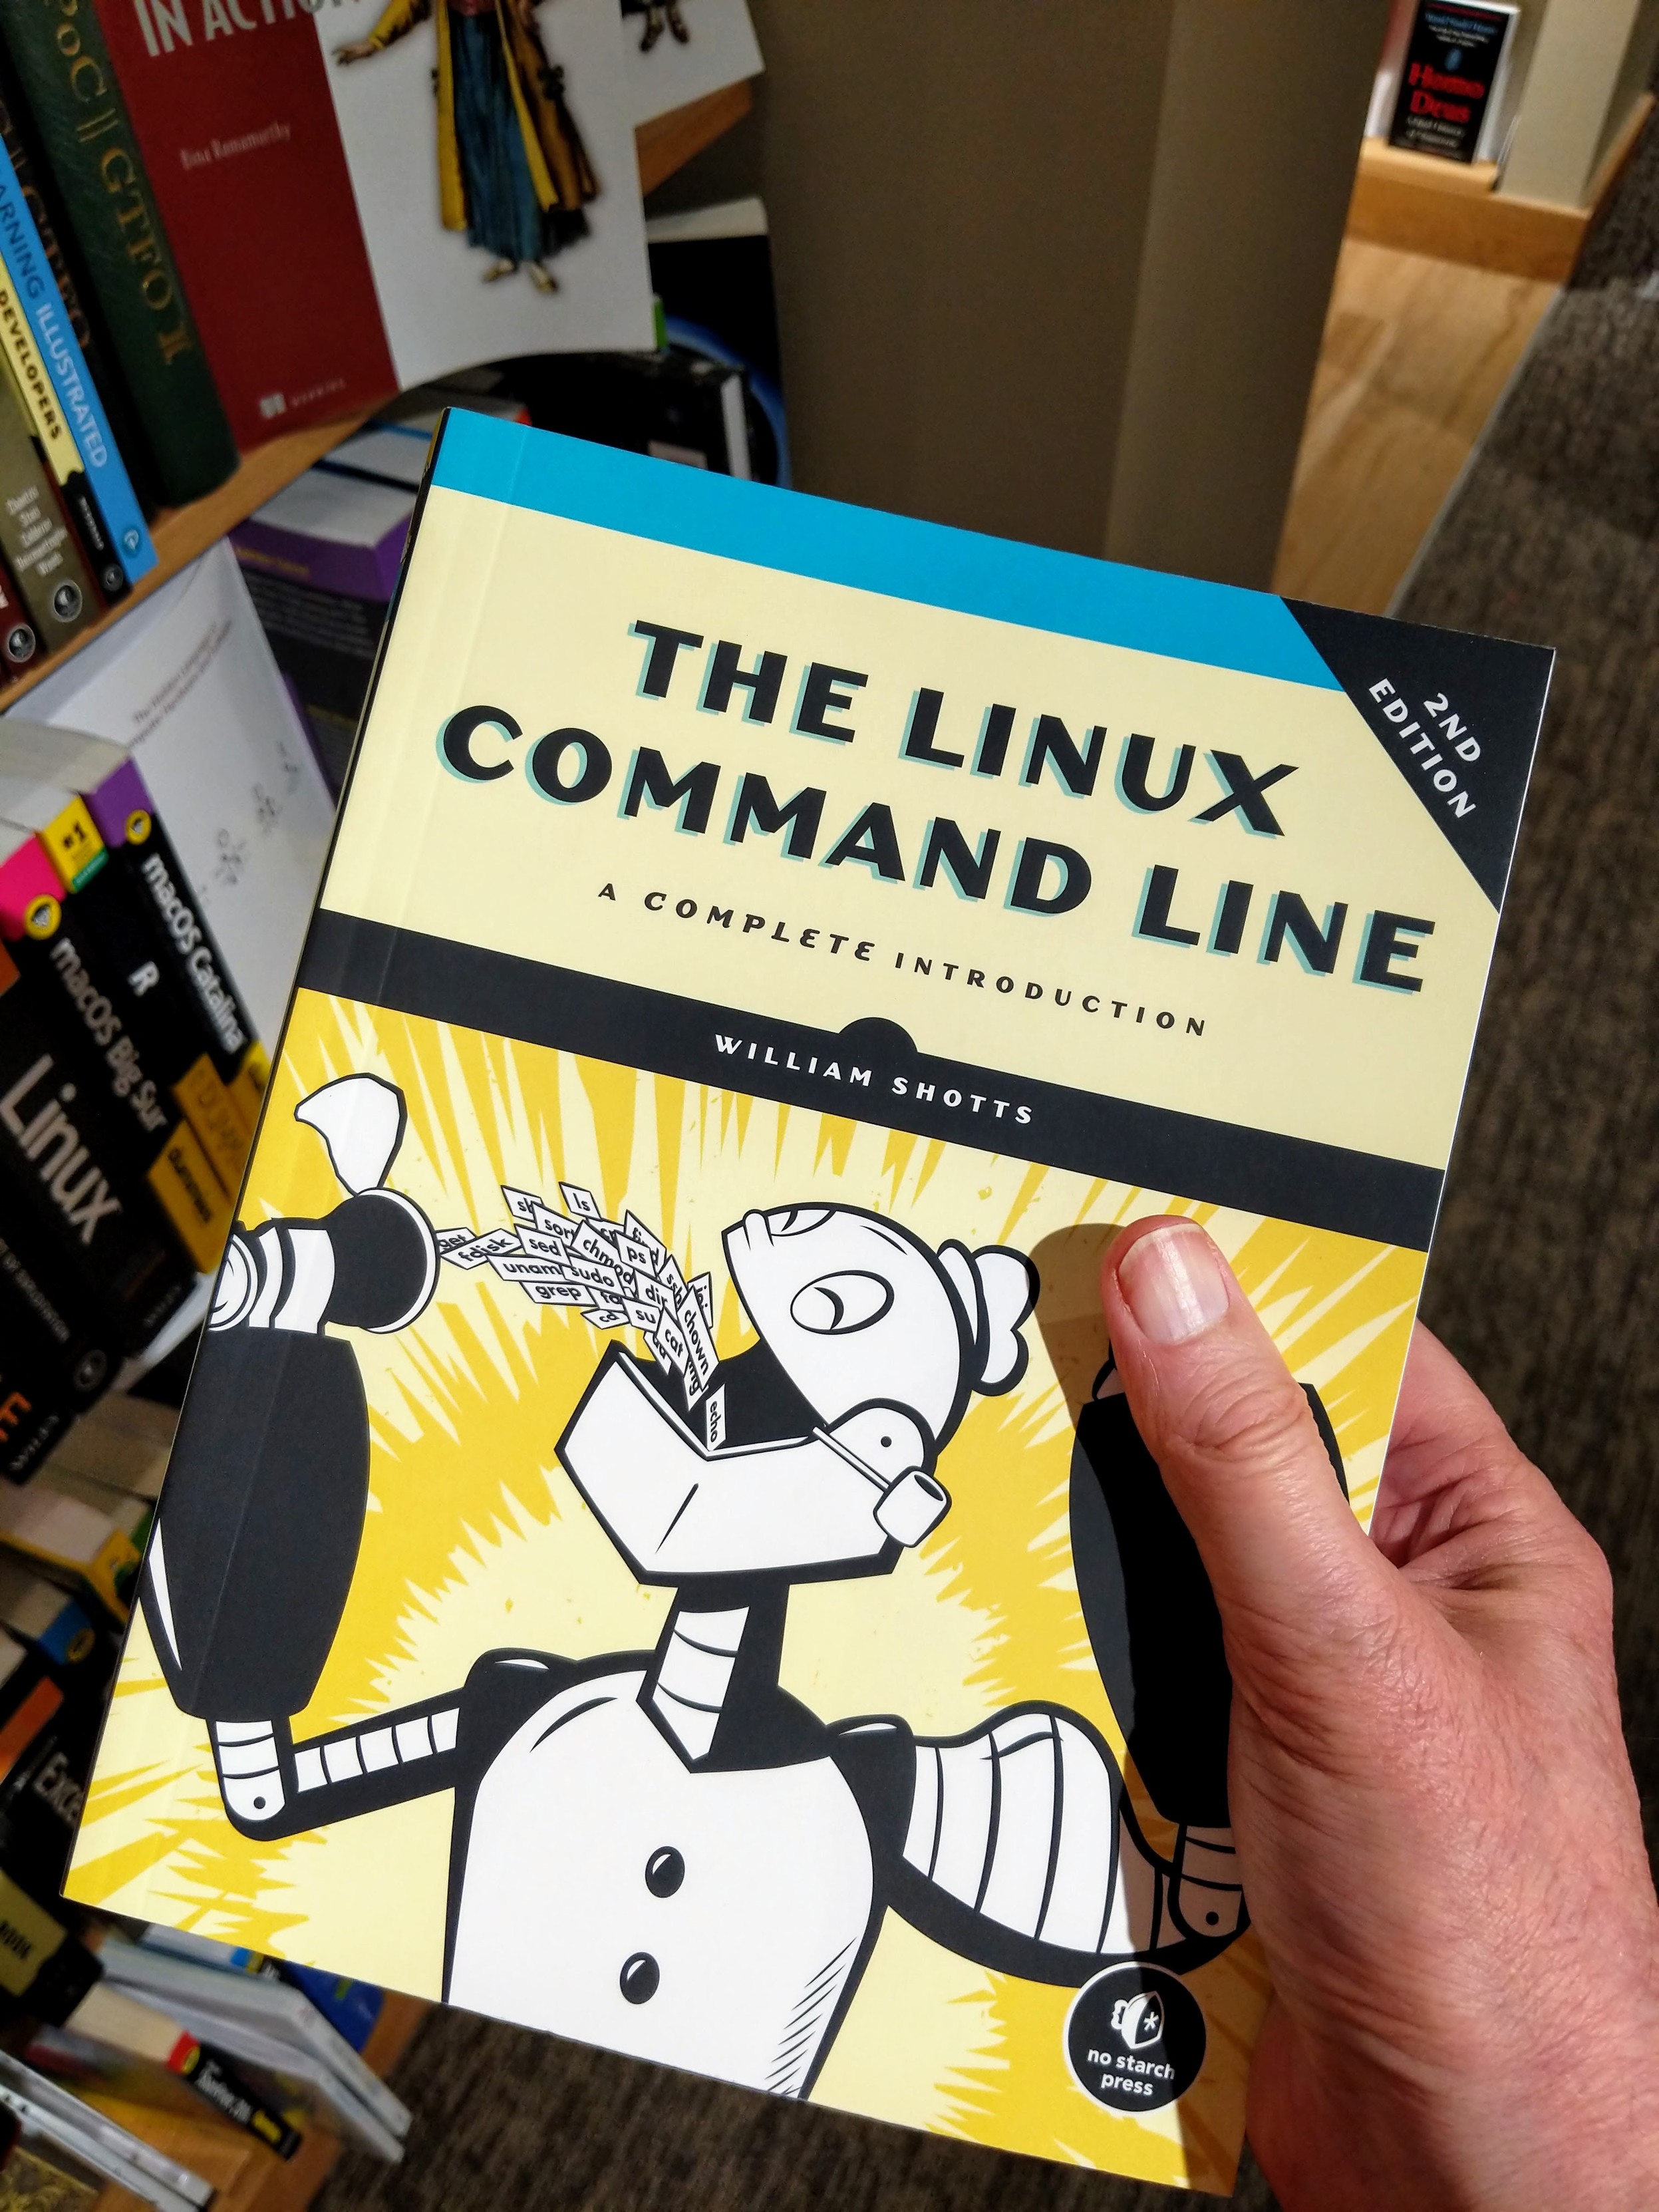 Copy of my book, The Linux Command Line found in my local Barnes & Noble bookstore.